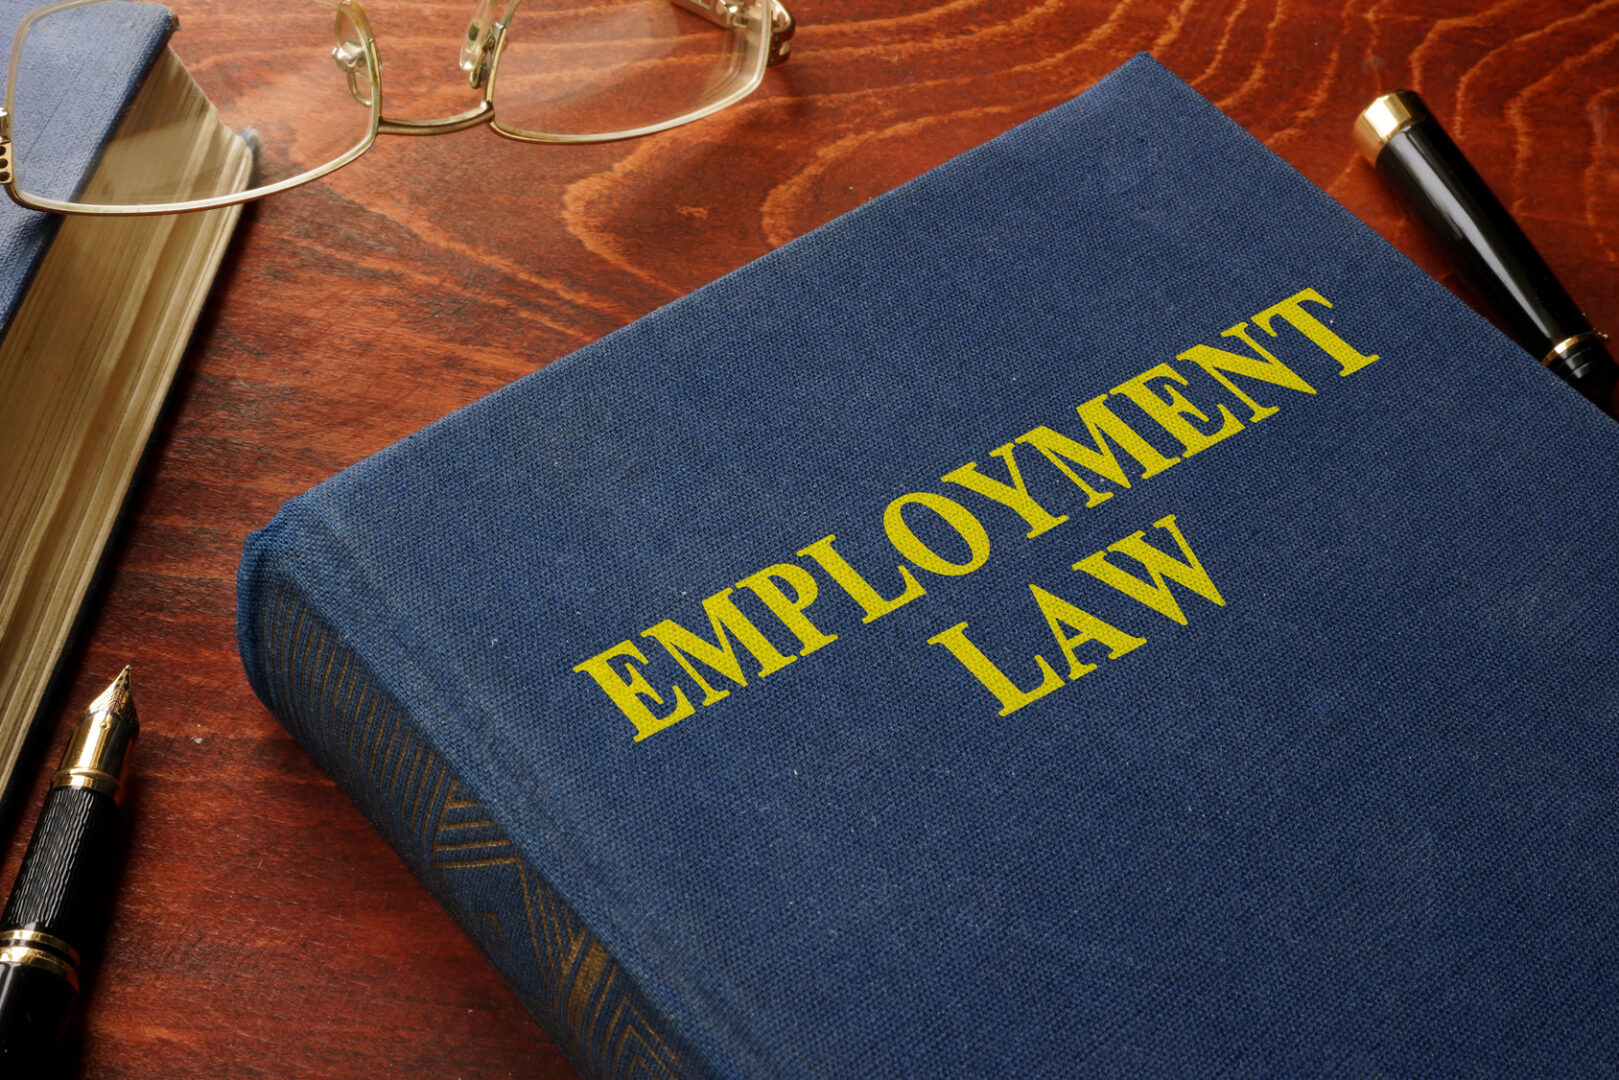 Book with title employment law.